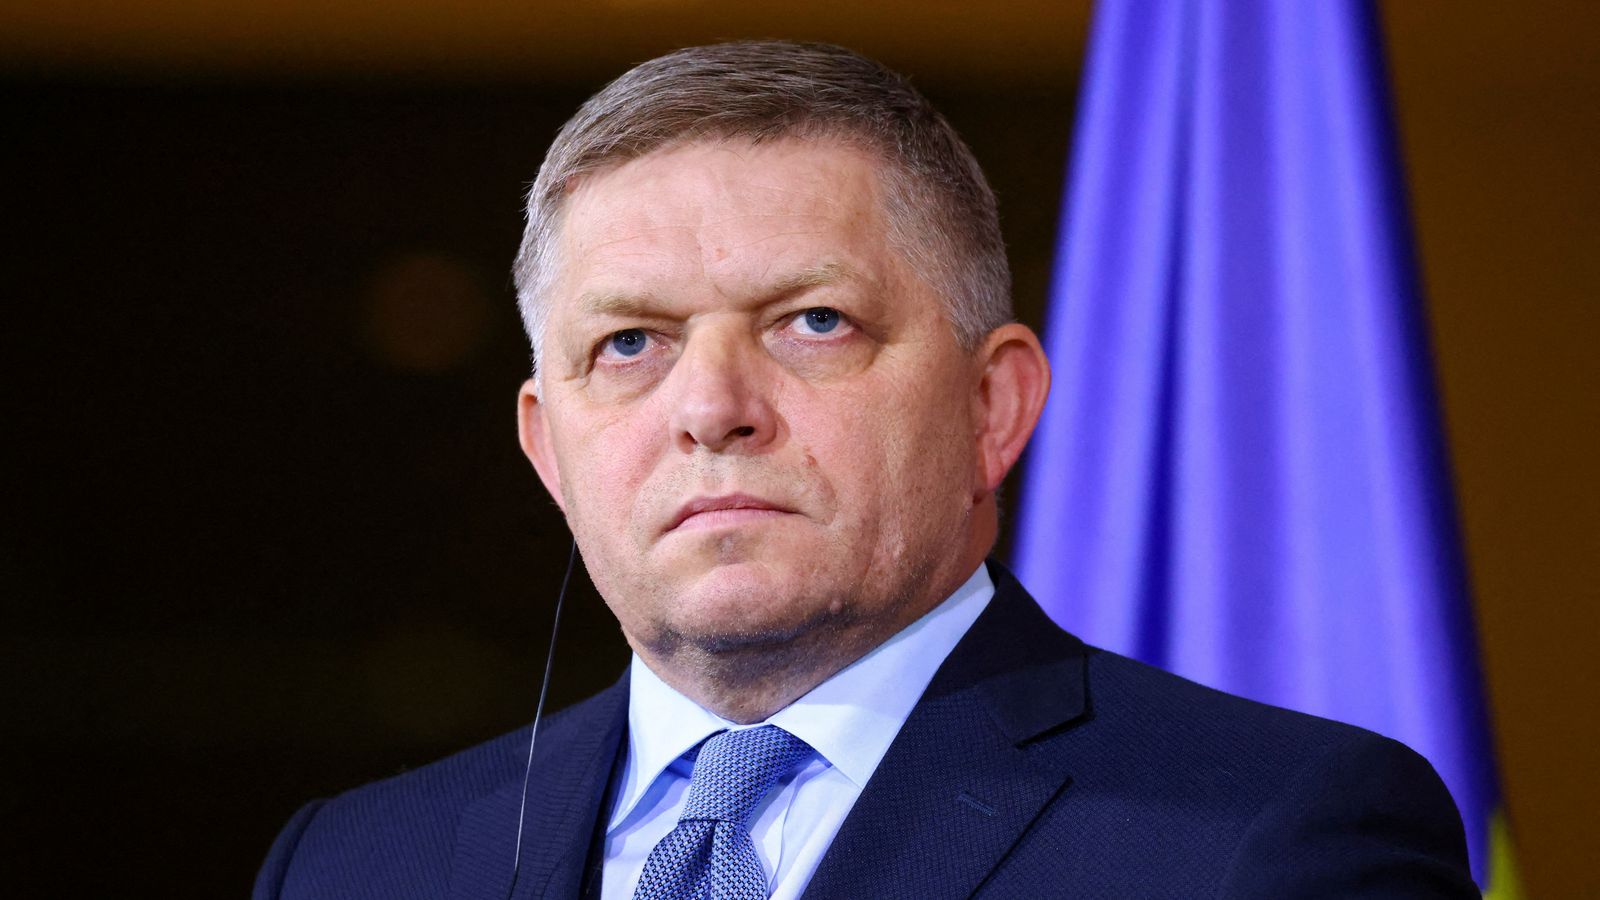 Slovak Prime Minister Robert Fico discharged from hospital after ...